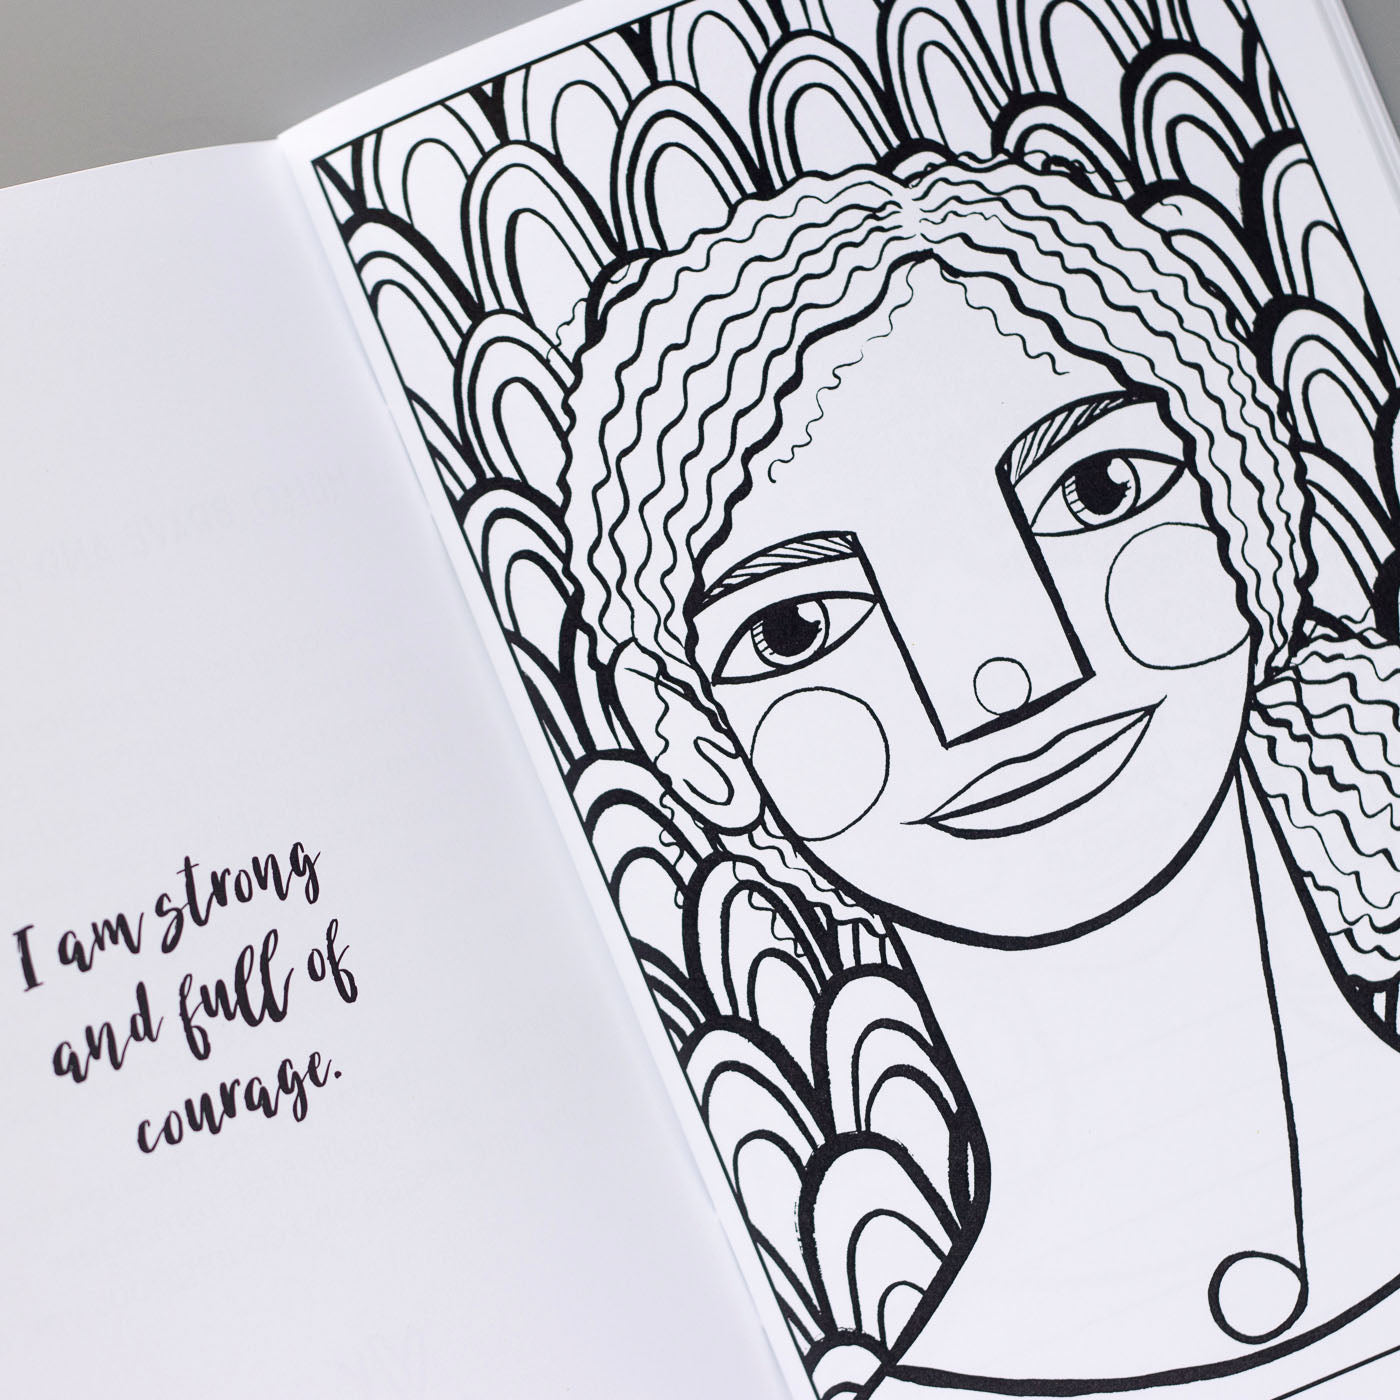 Interior page from the Courageous Coloring workbook, a coloring book for tween and teen girls.